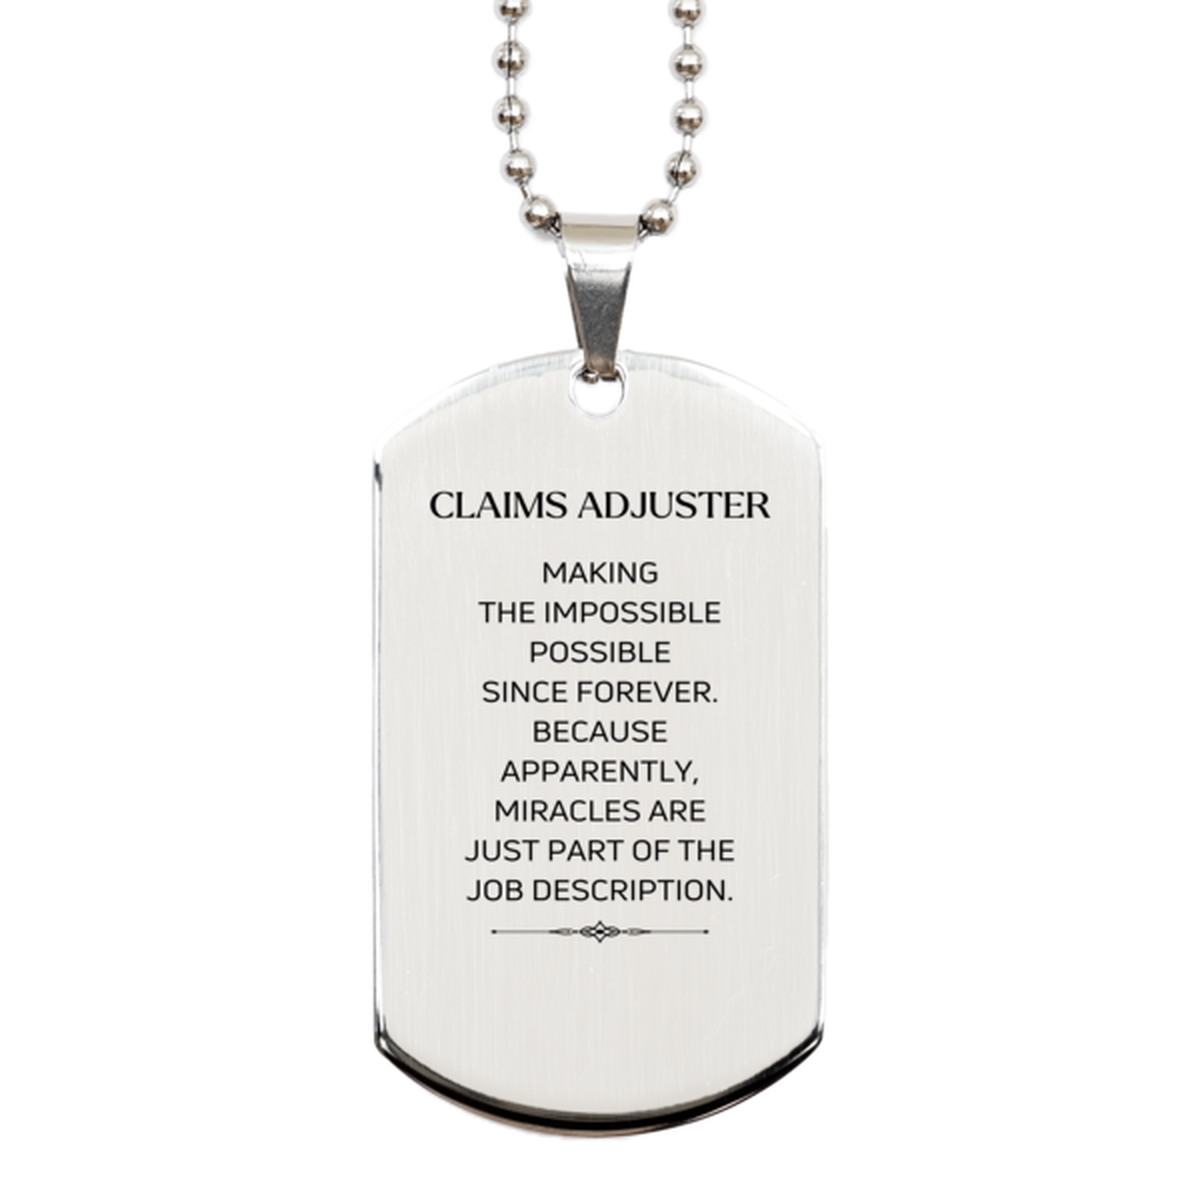 Funny Claims Adjuster Gifts, Miracles are just part of the job description, Inspirational Birthday Silver Dog Tag For Claims Adjuster, Men, Women, Coworkers, Friends, Boss